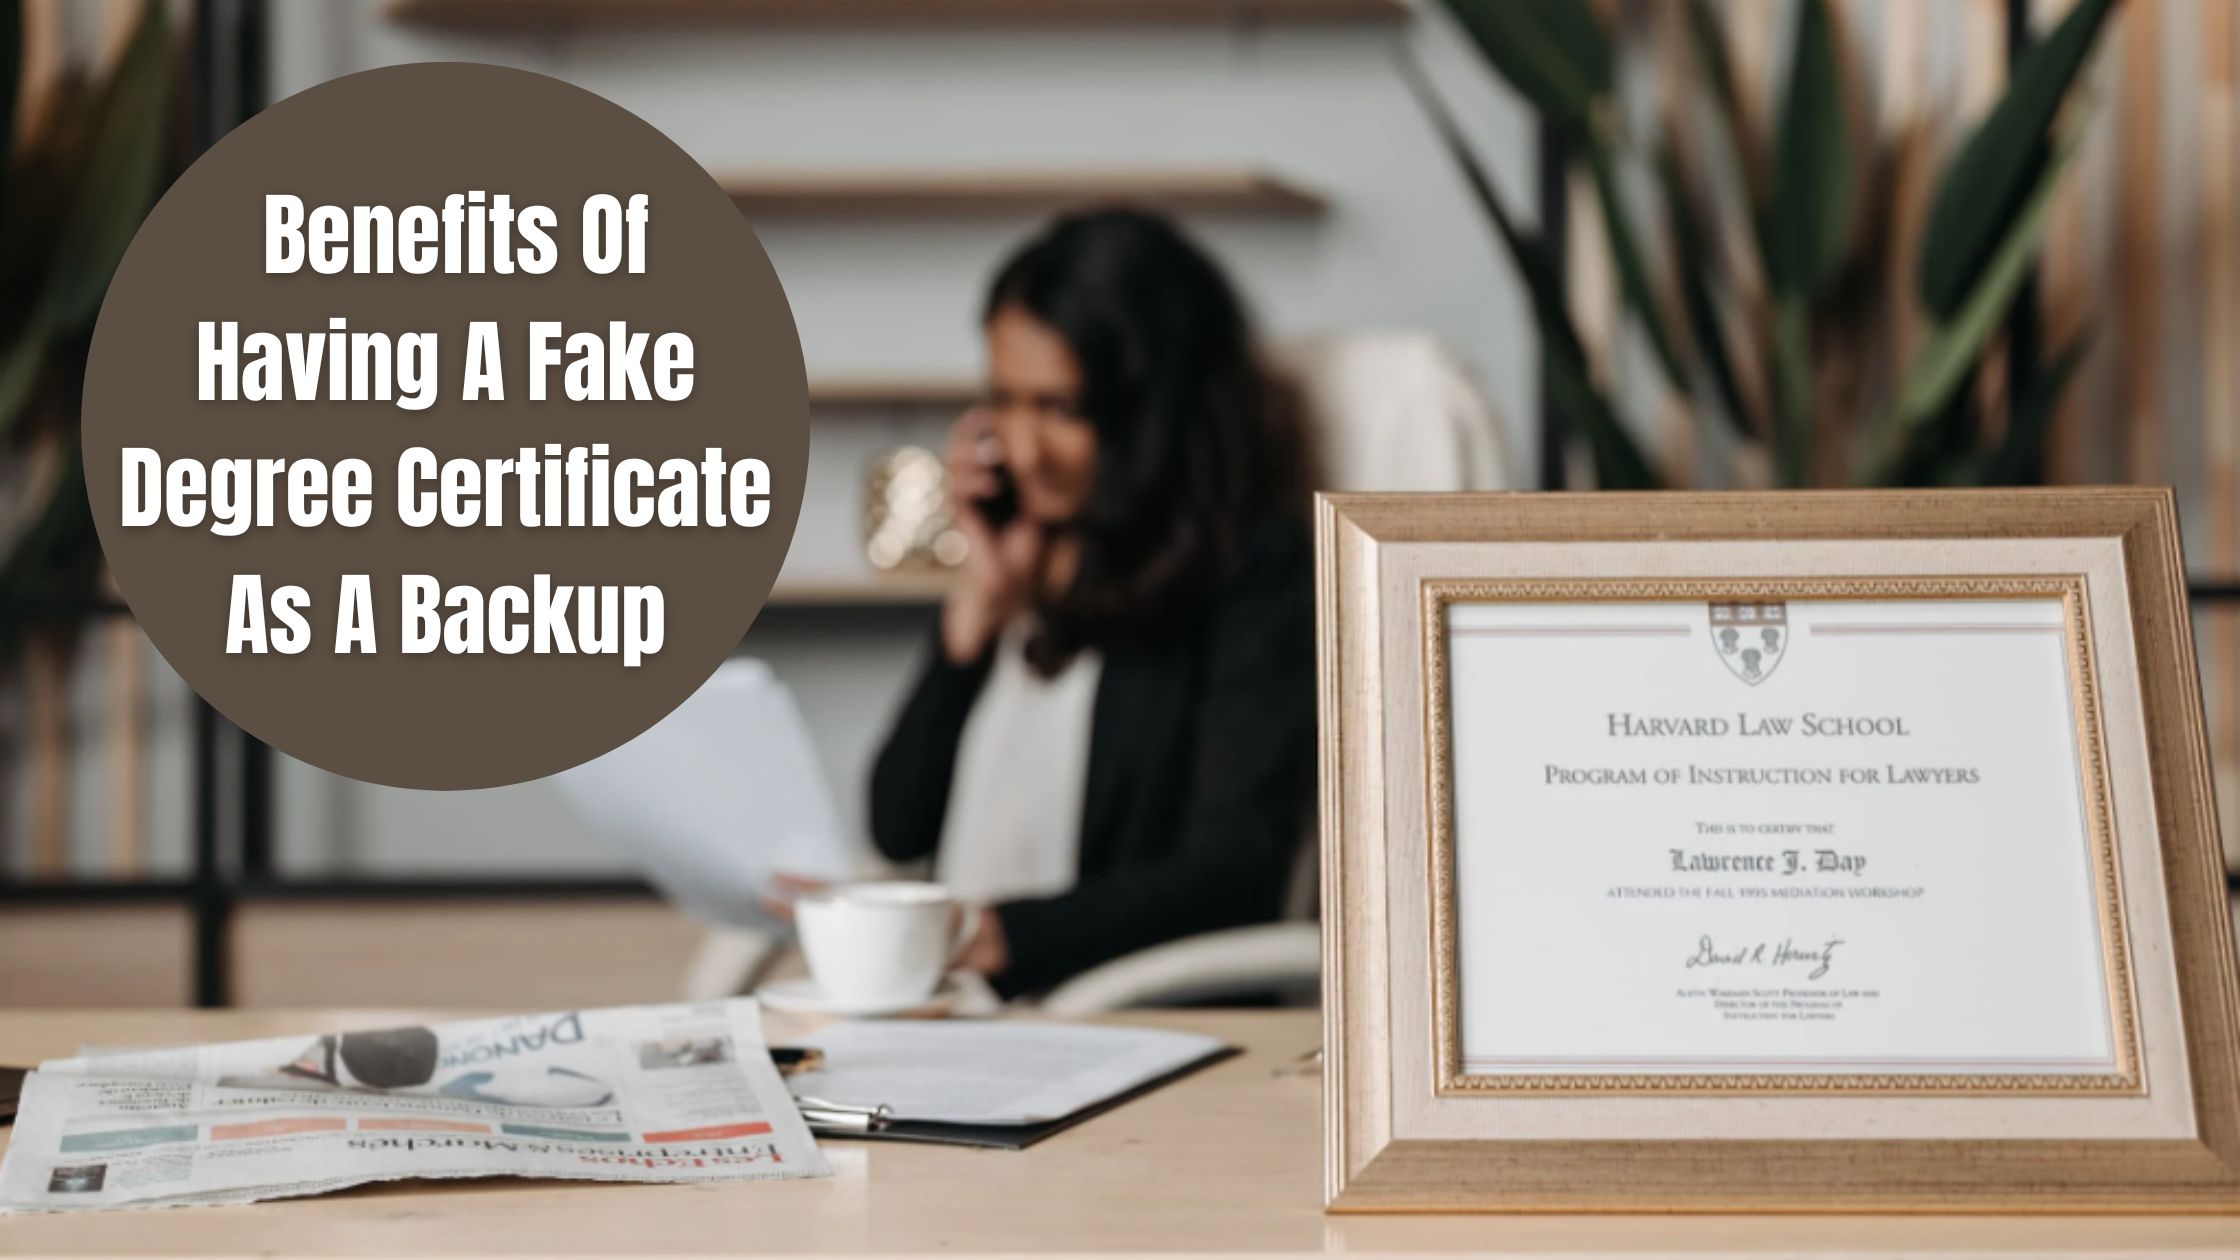 Benefits Of Having A Fake Degree Certificate As A Backup